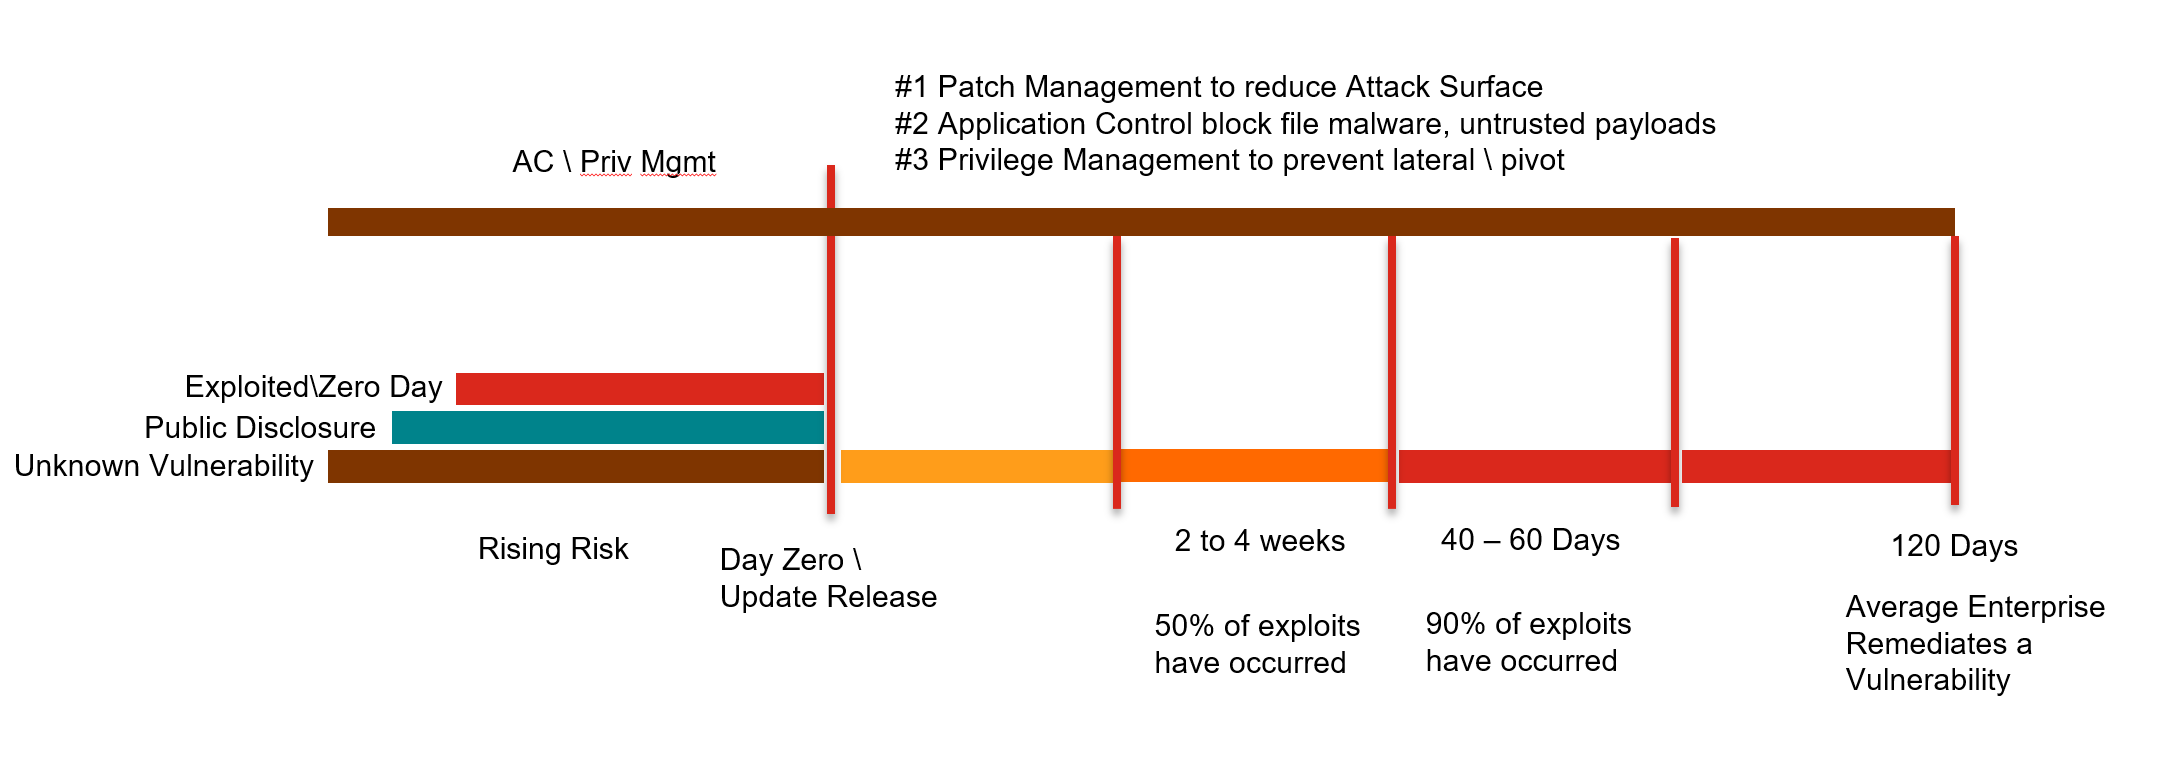 AC/Privilege Management - timetopatch graphic